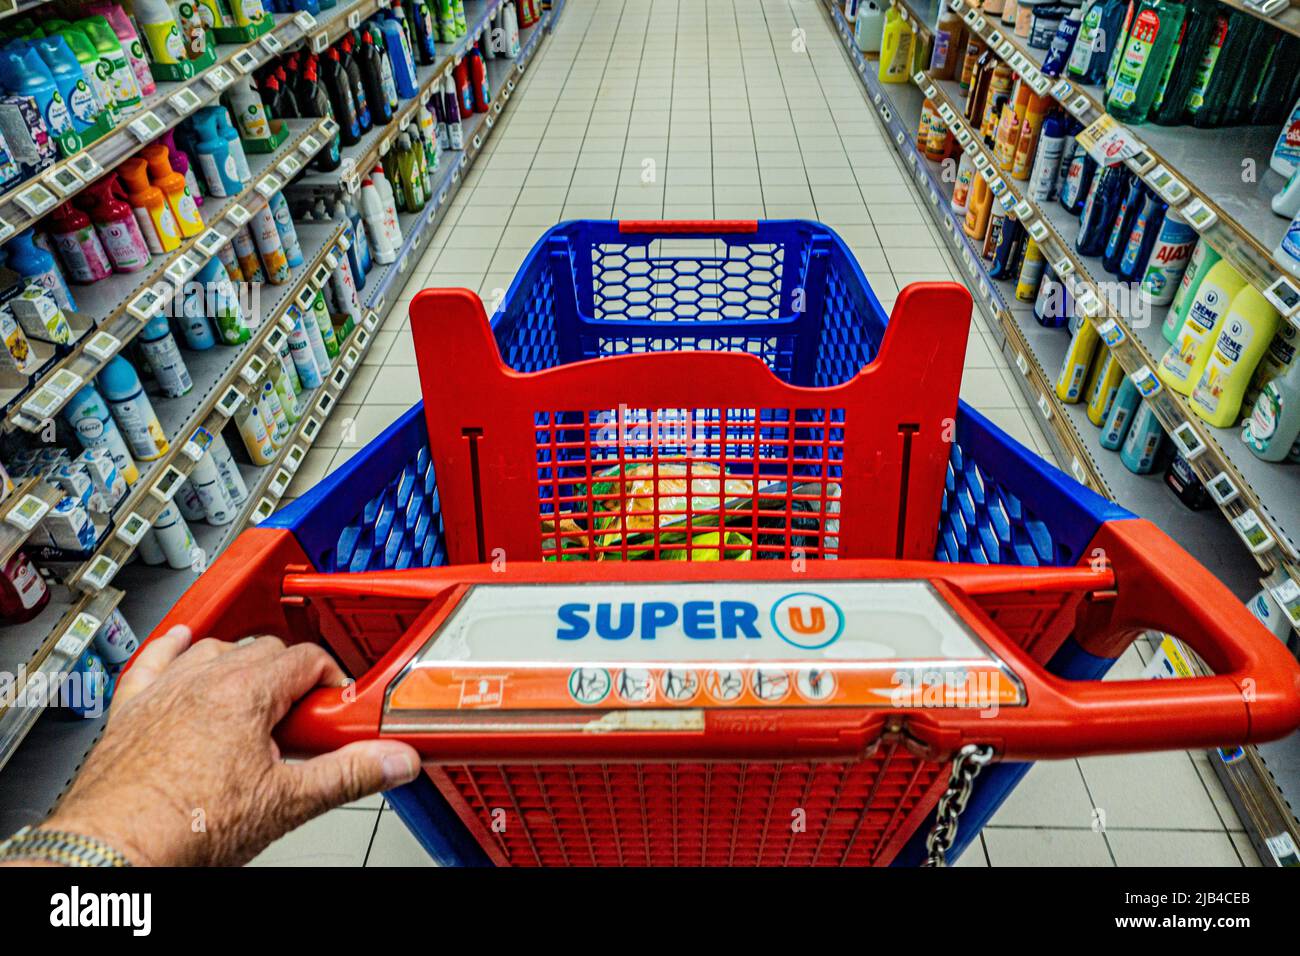 Interior of Super U French Supermarket looking down into shopping trolly Stock Photo